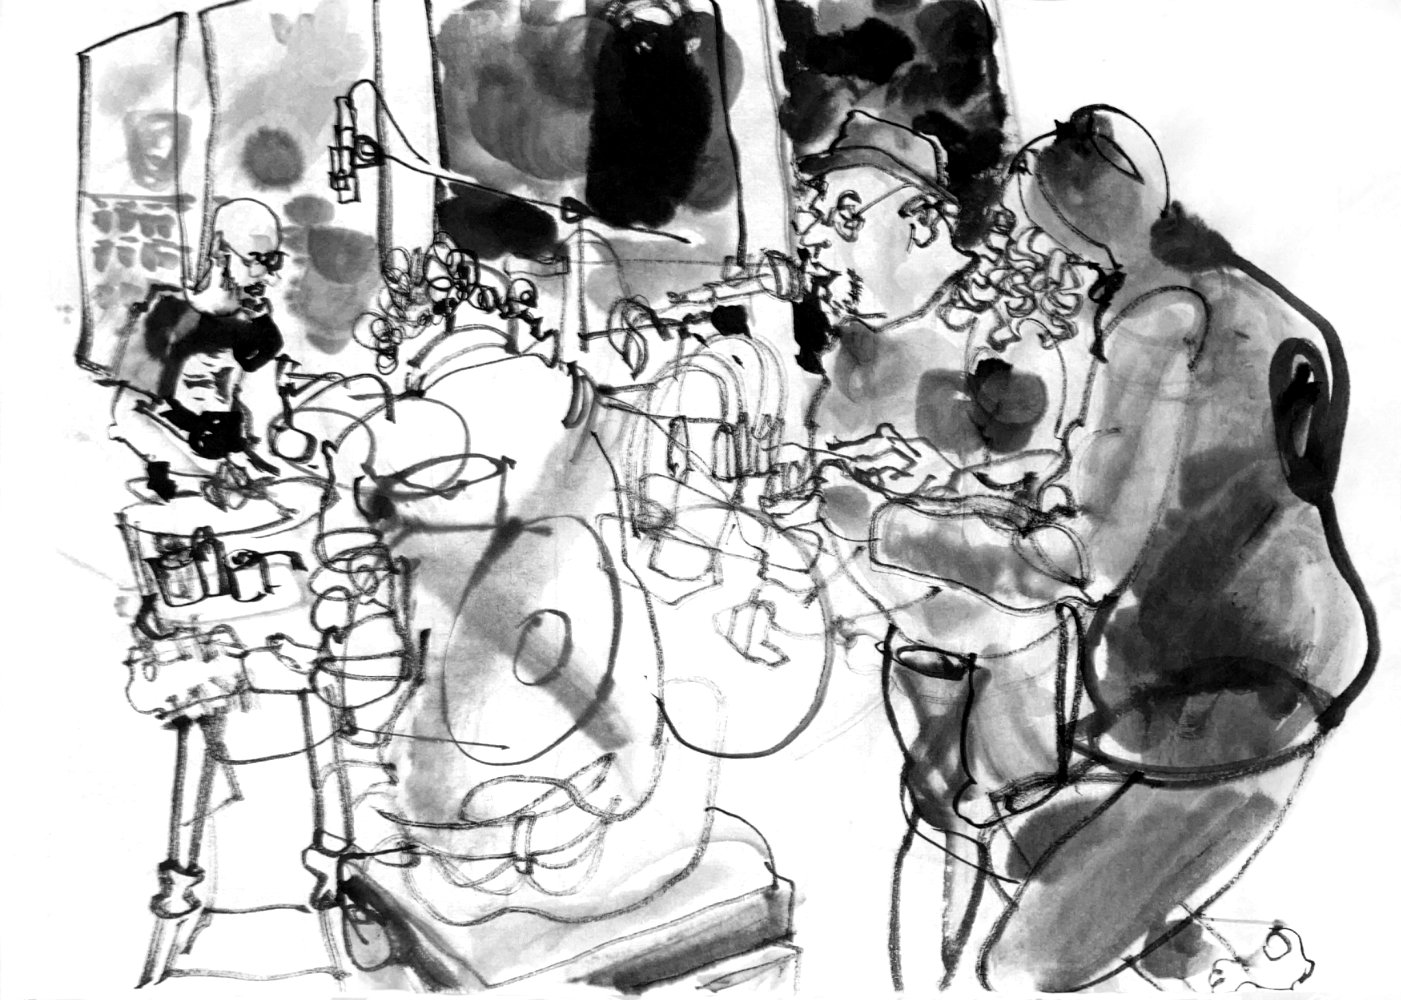 Ink drawing of four musicians, on the right two men at desks with electronics and microphones for voice, a guitarist seen from the back and a drummer.